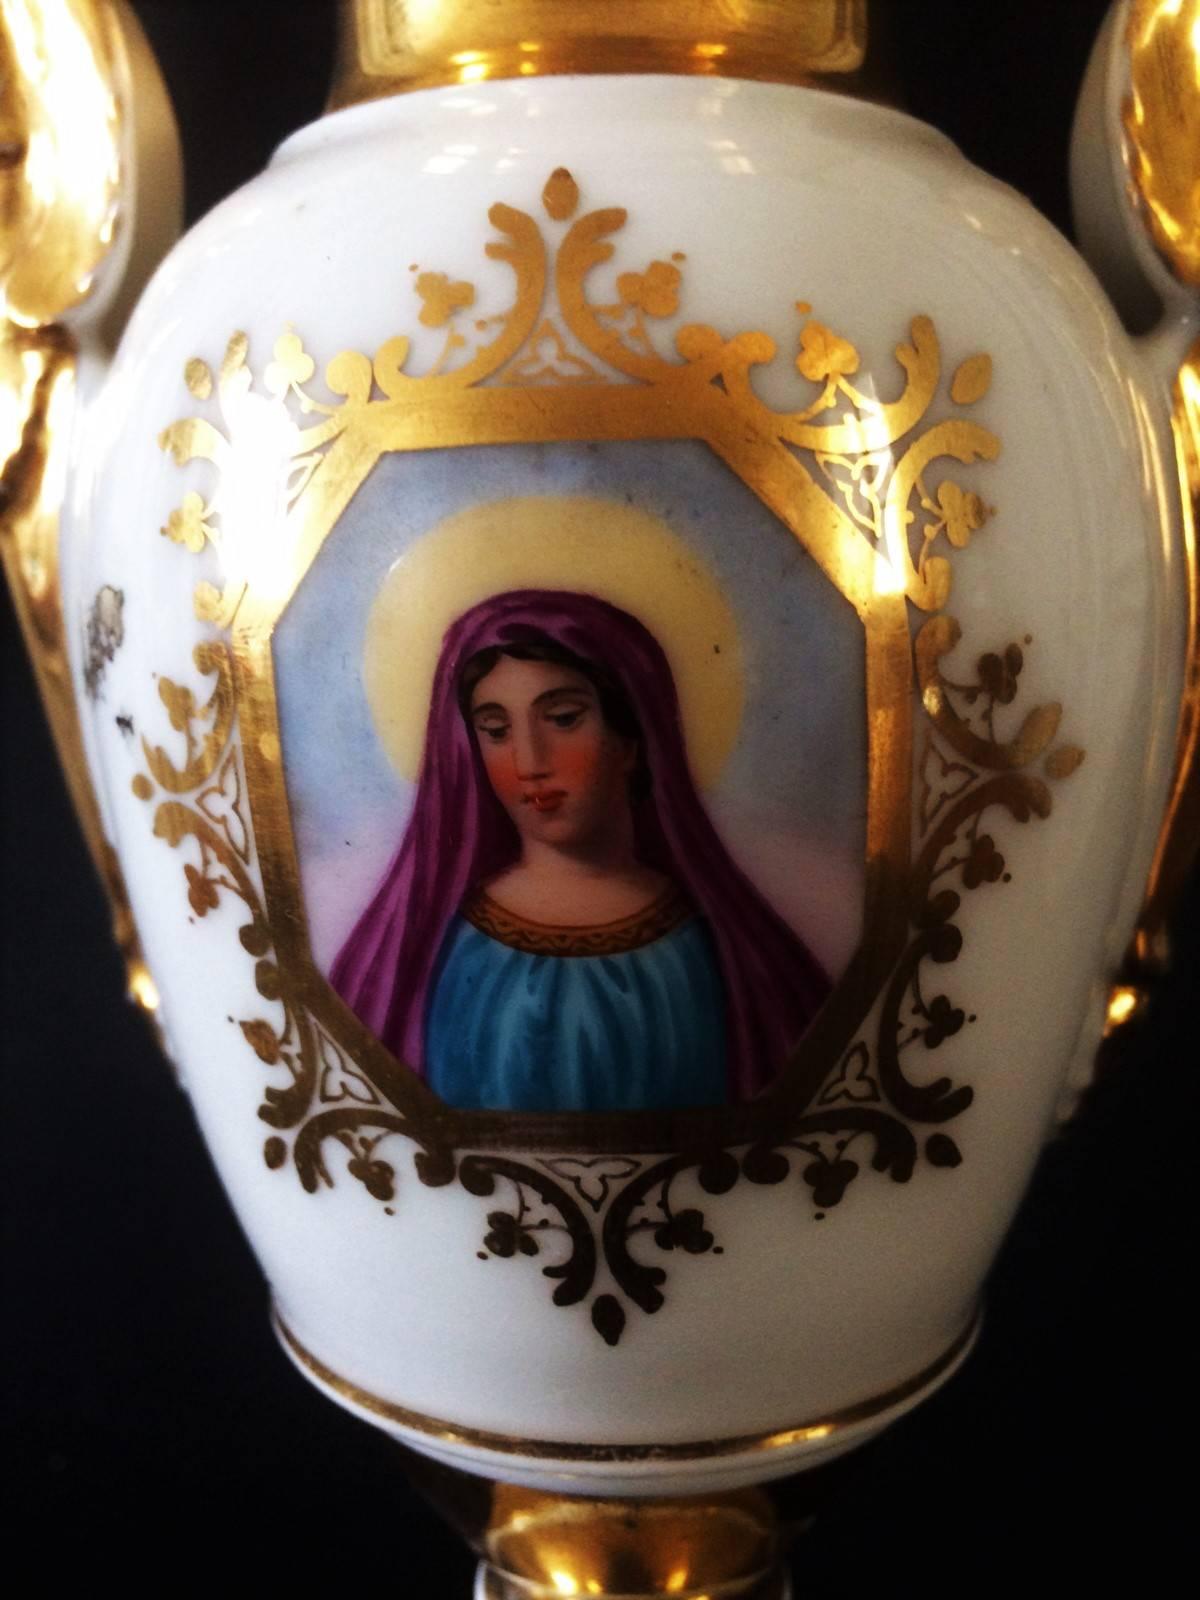 Charming Paris porcelain hotel vase of baluster shape, decorated with gilding and a portrait of the Virgin Mary hand painted in a reserve on the vase.
Effigy of Virgin Mary.
beautiful religious object.
France.
Napoleon III period.